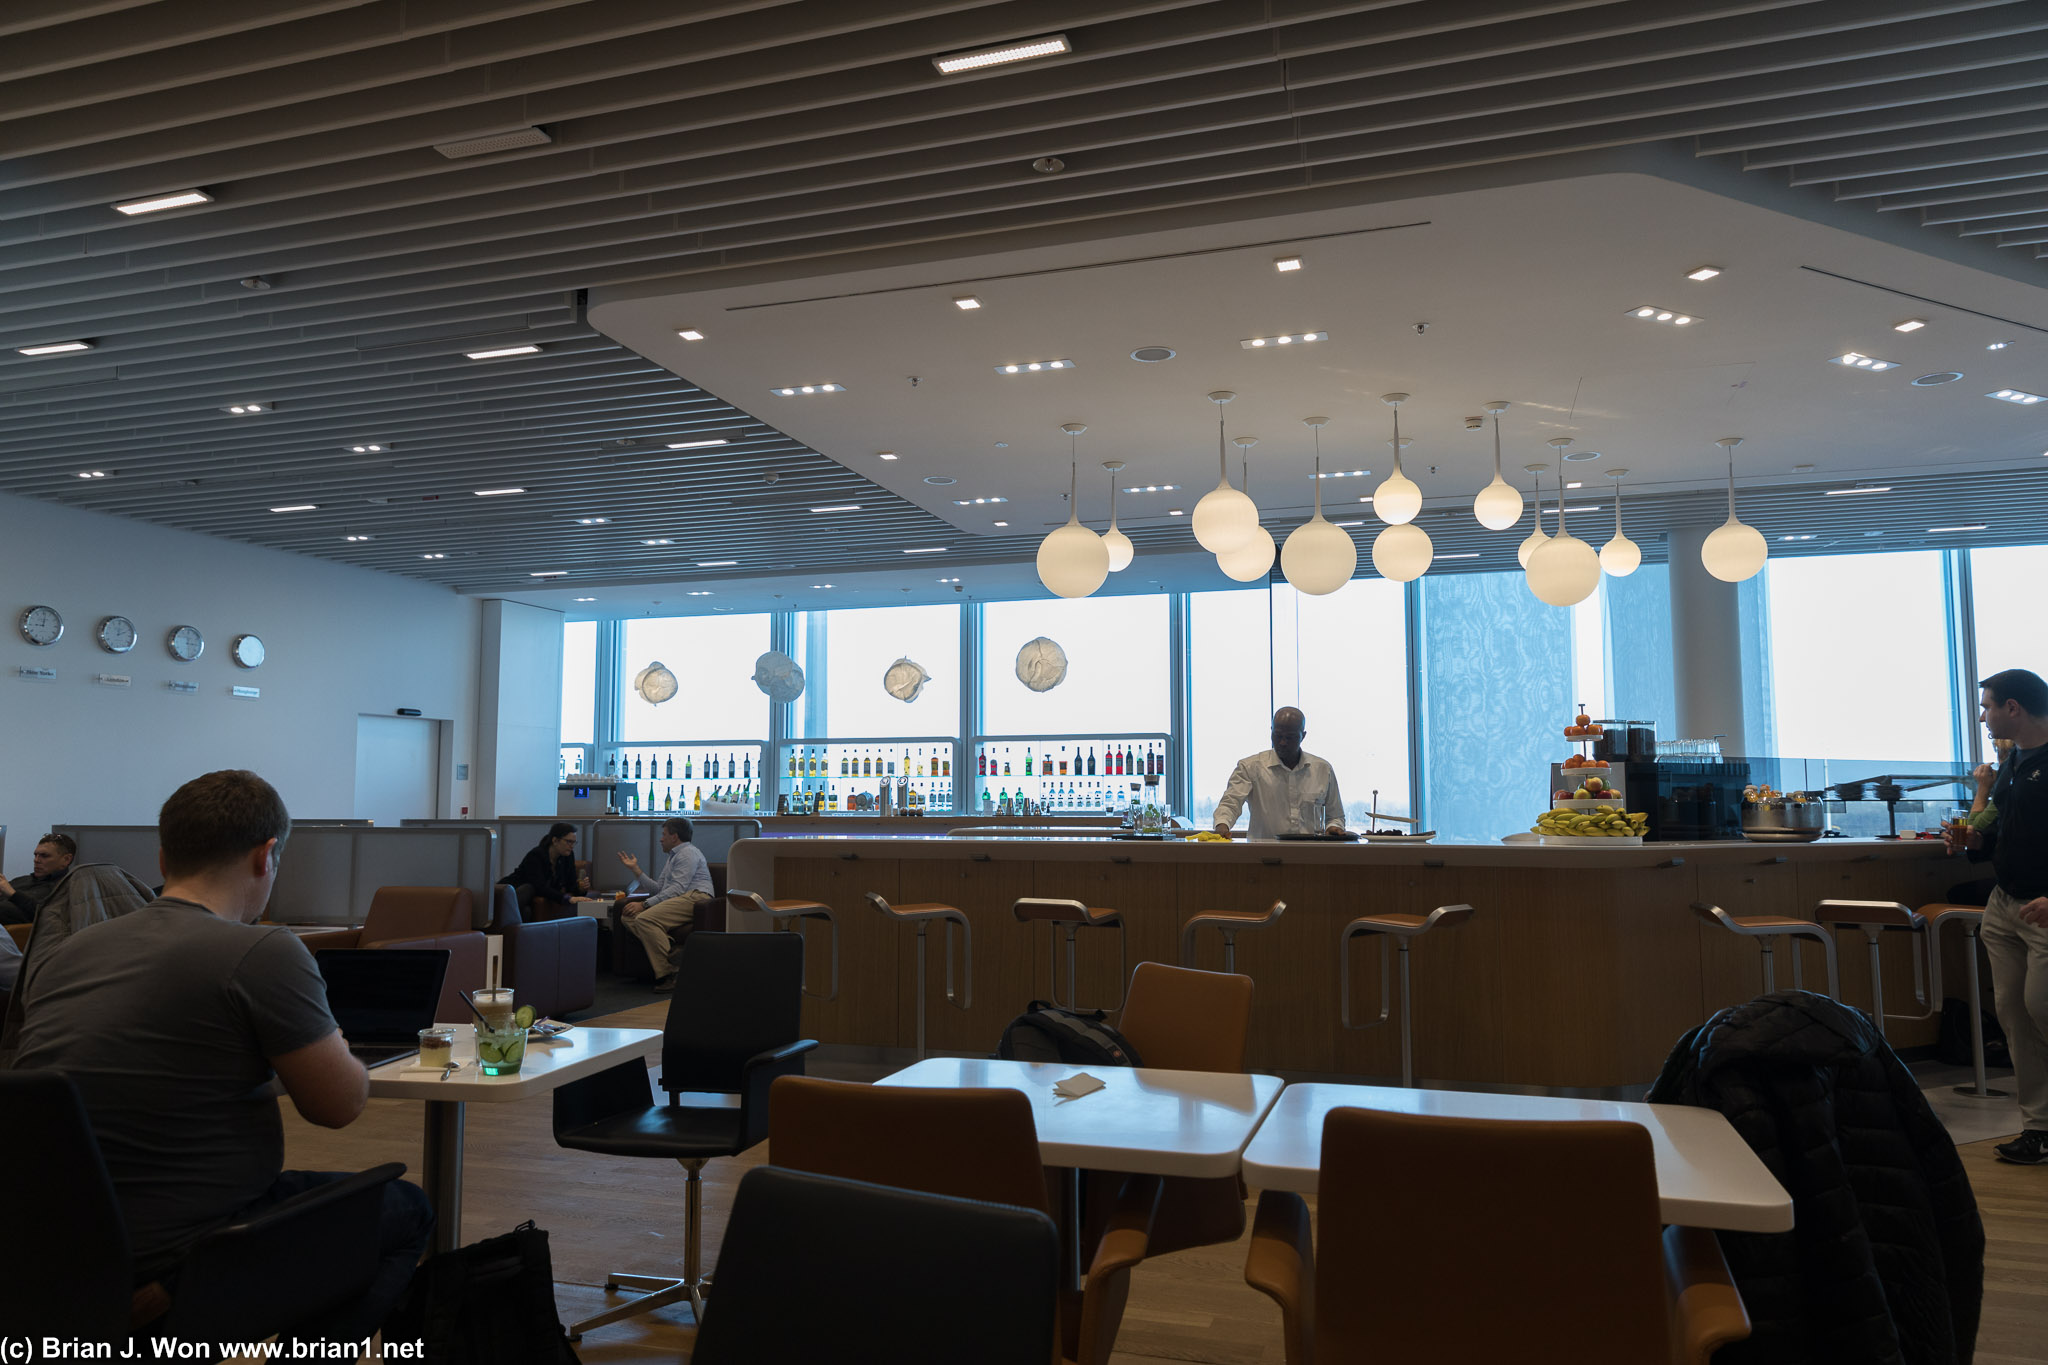 Yet another Lufthansa lounge, this time in the satellite terminal.